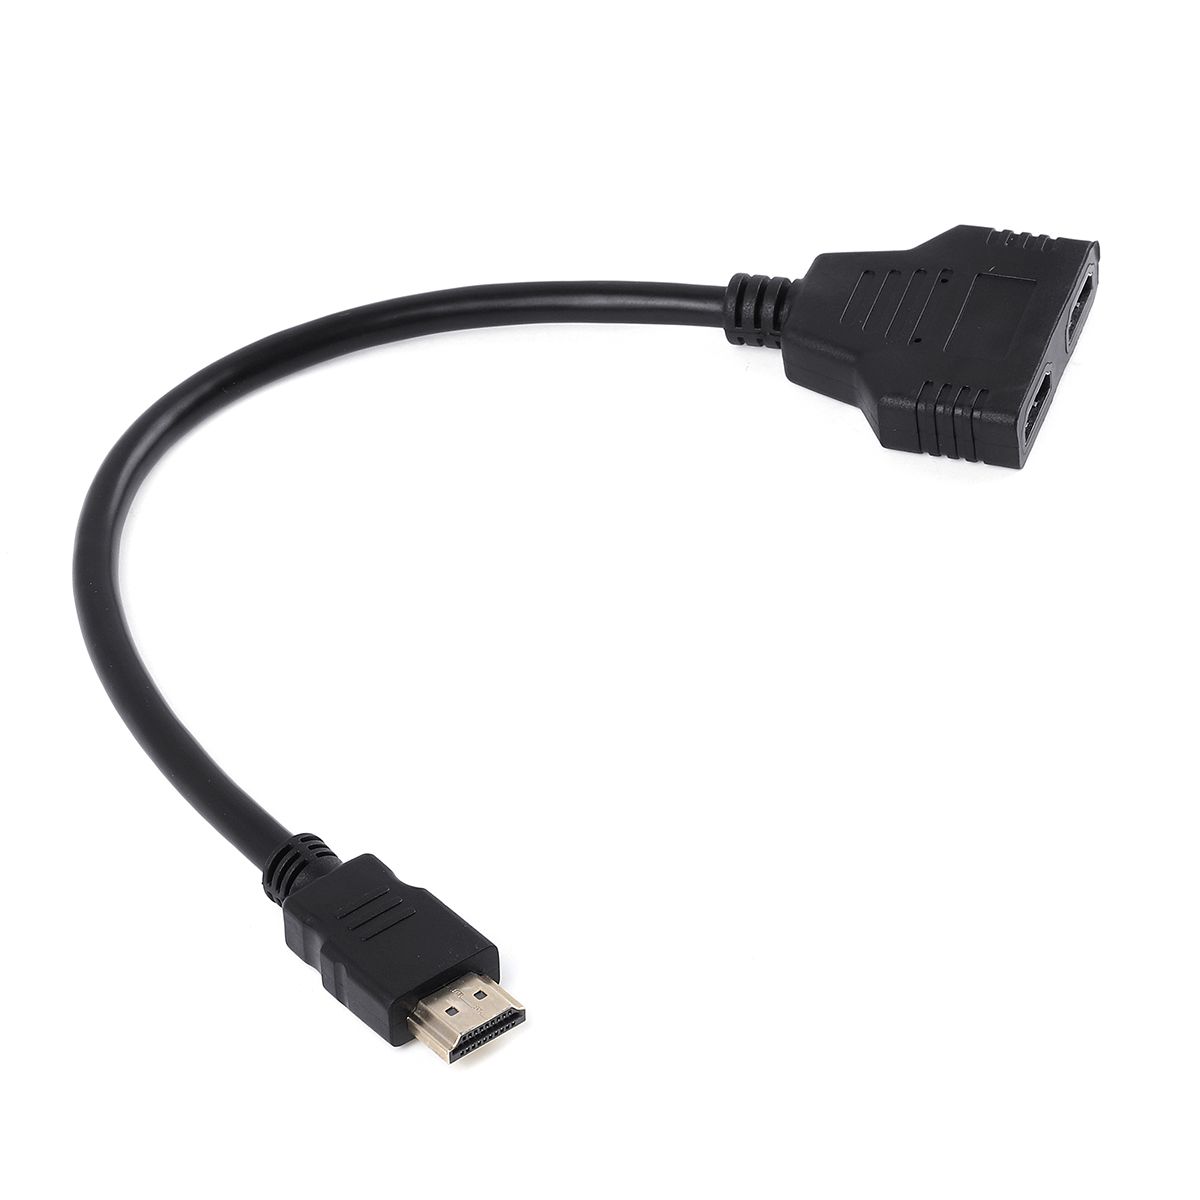 1080P-HDMI-Cable-Splitter-Adapter-20-Converter-1-In-2-Out-1-Male-to-2-Female-1759883